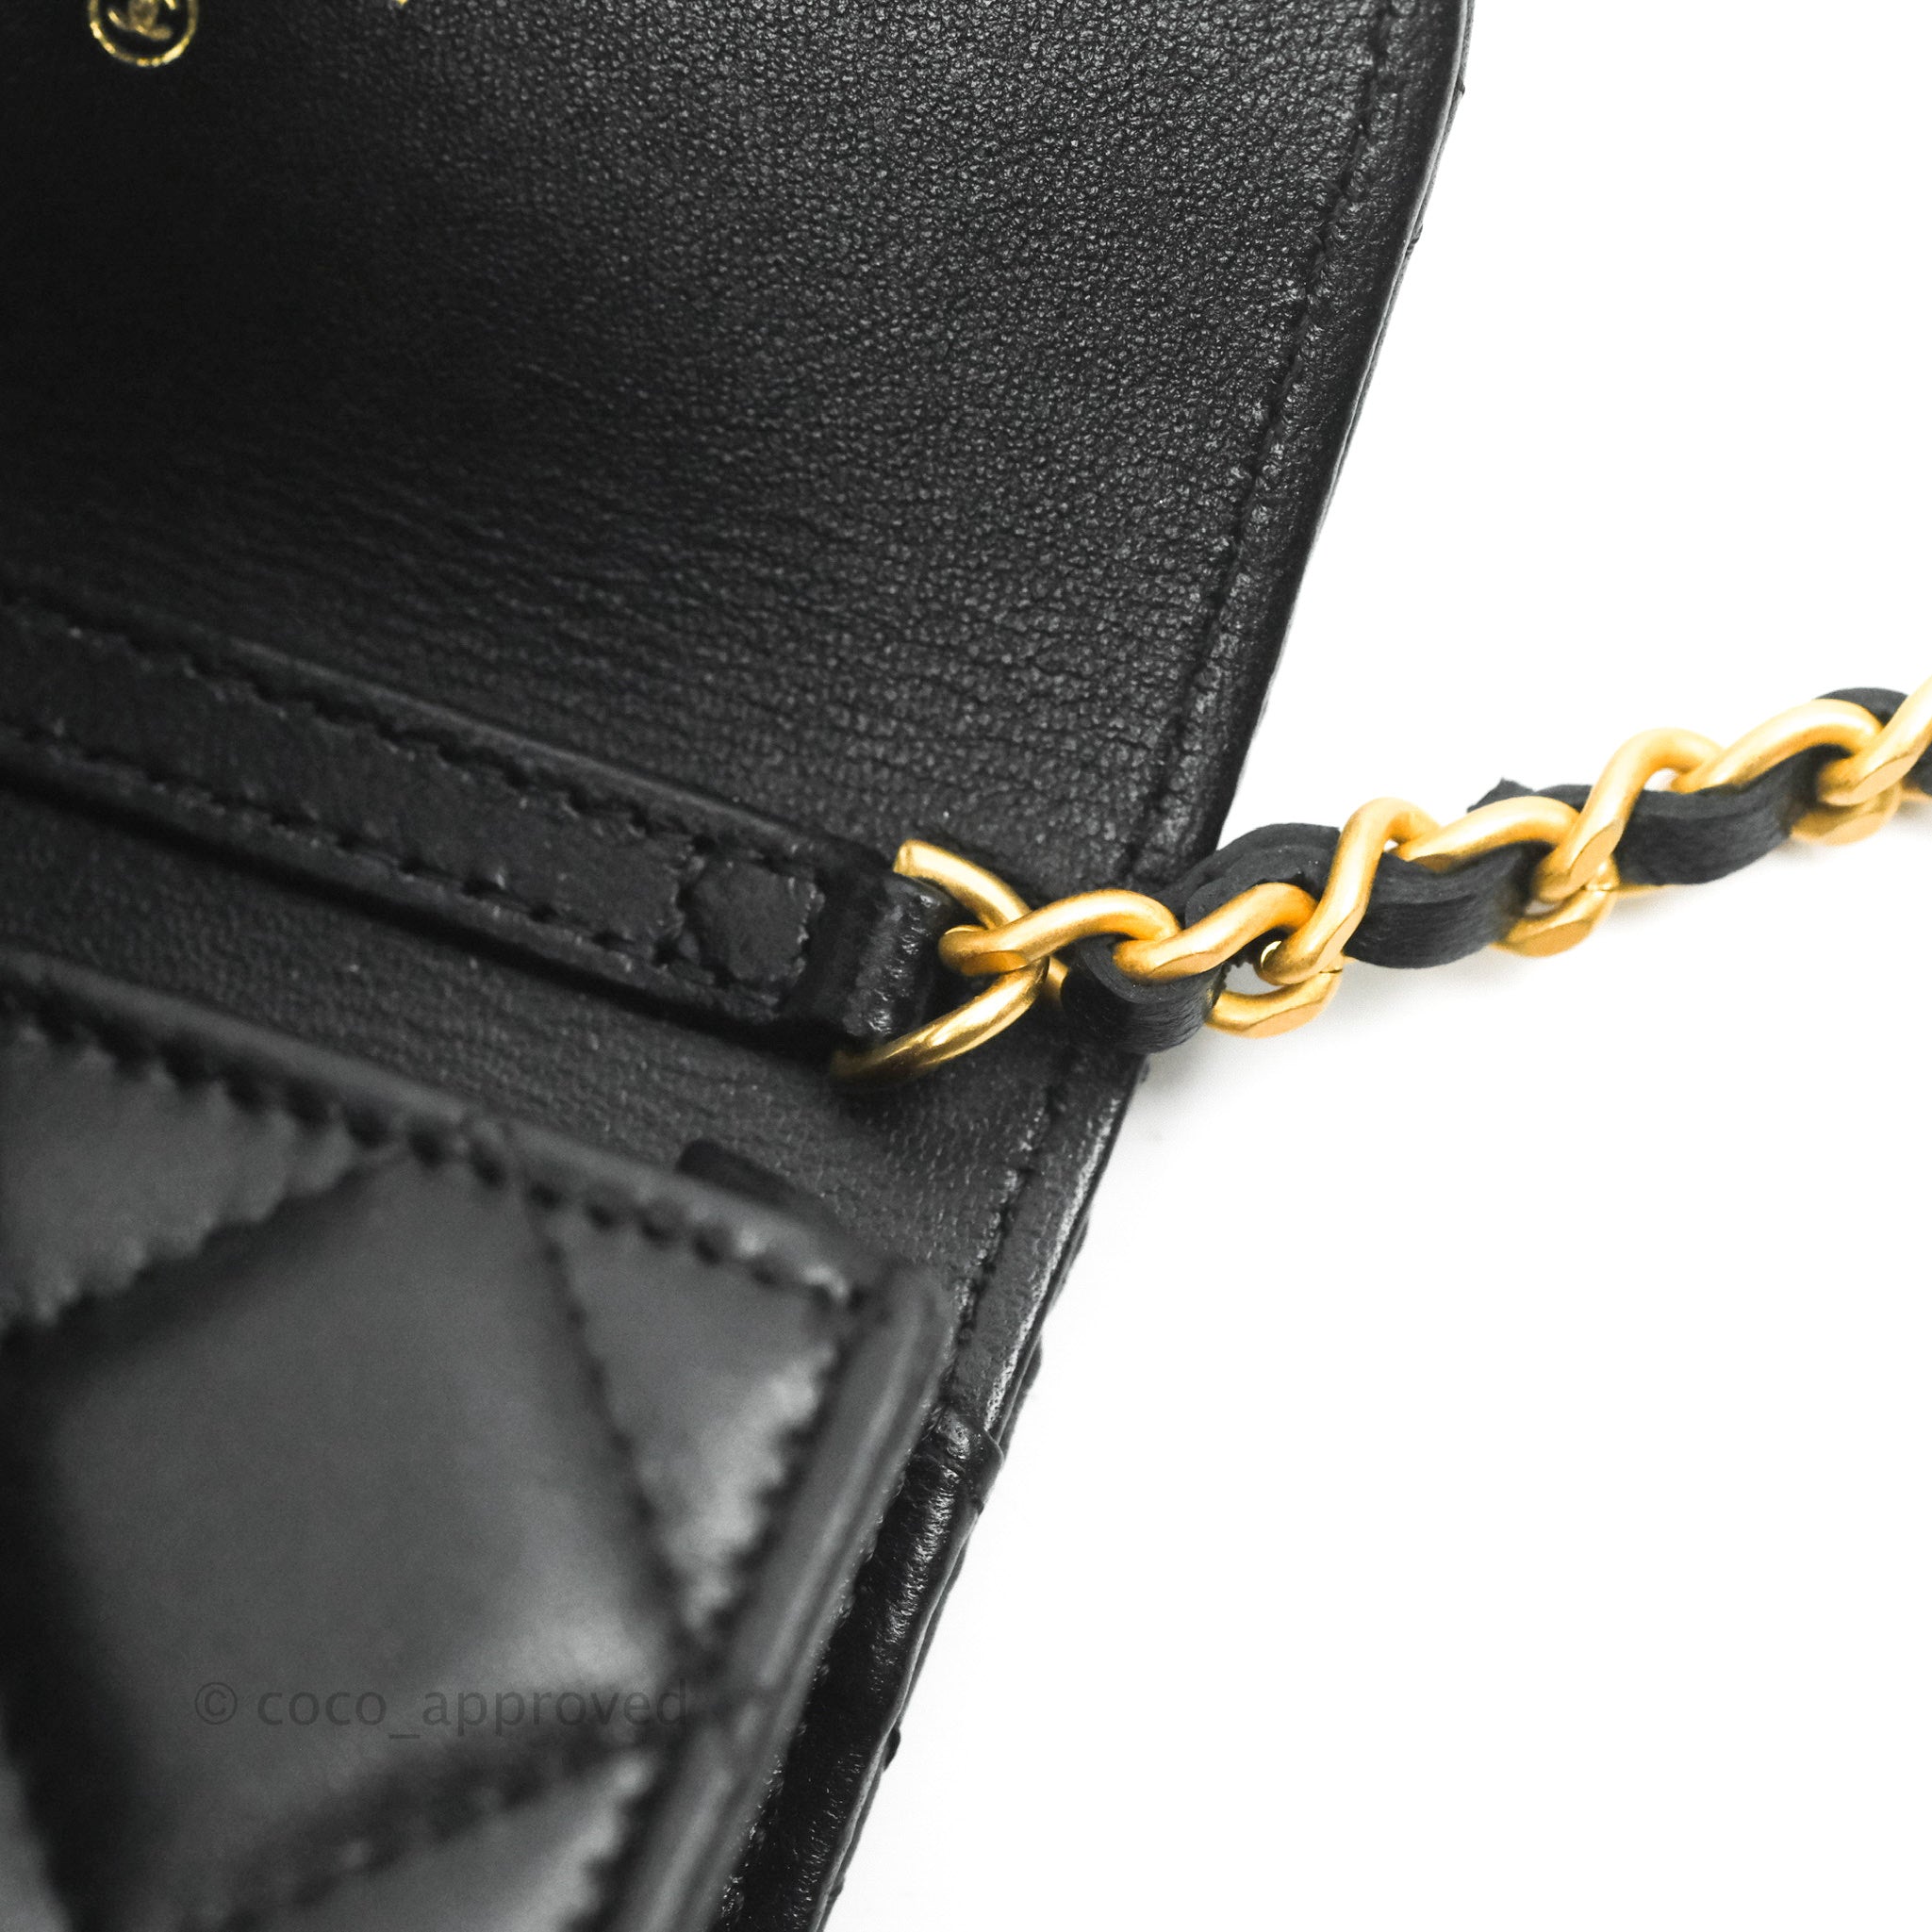 Chanel Wallet on Chain Black Camellia Lambskin Leather and